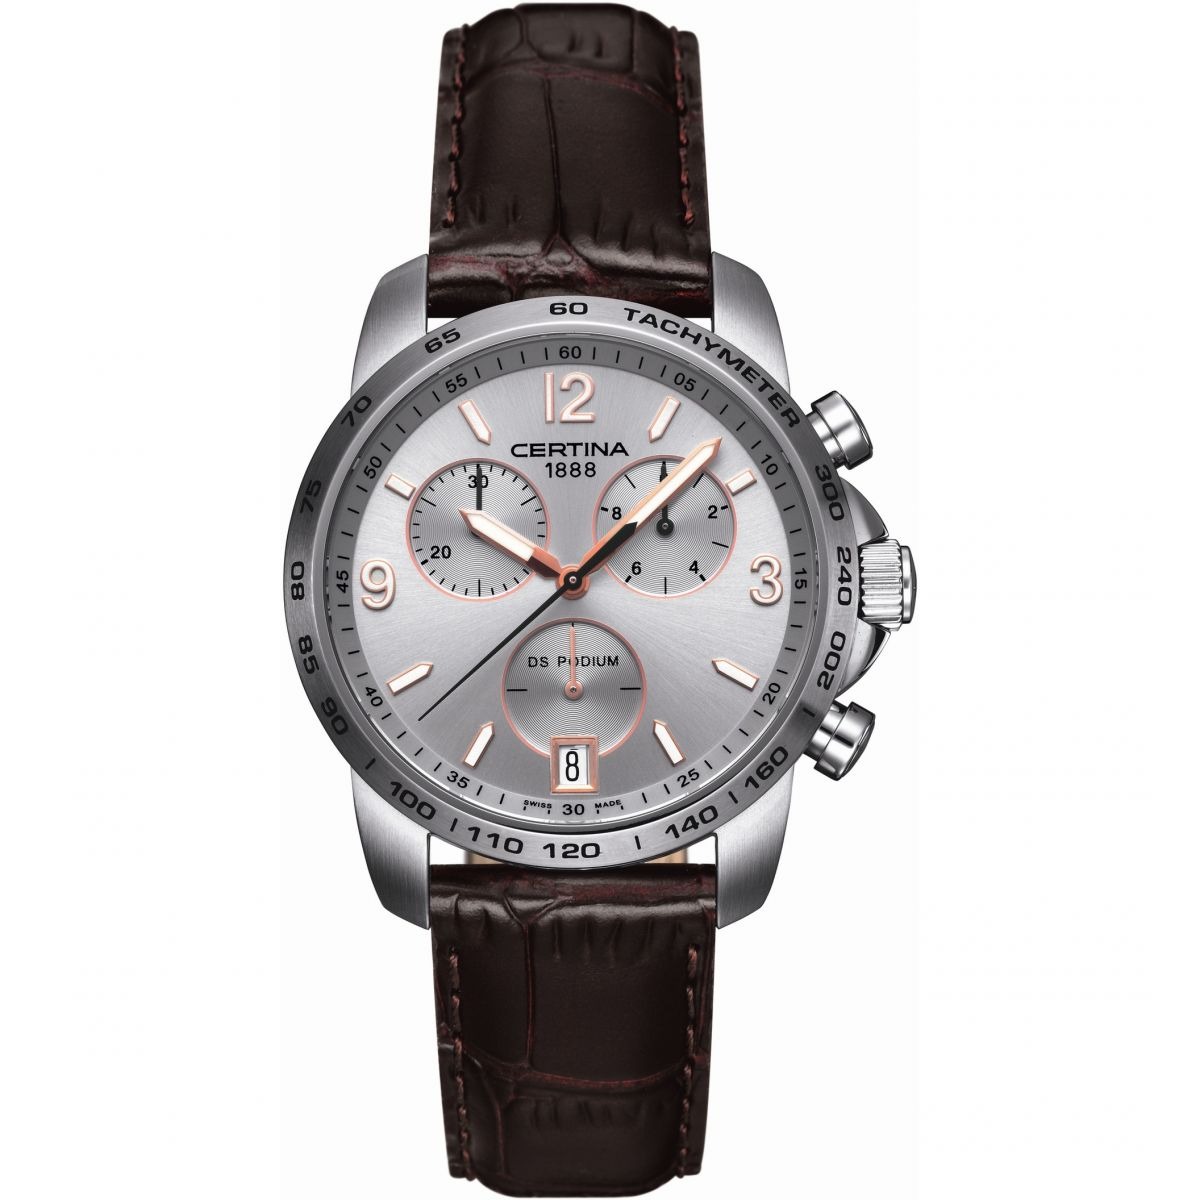 Certina - Silver Chronograph Watch for Man at Watch Shop GOOFASH